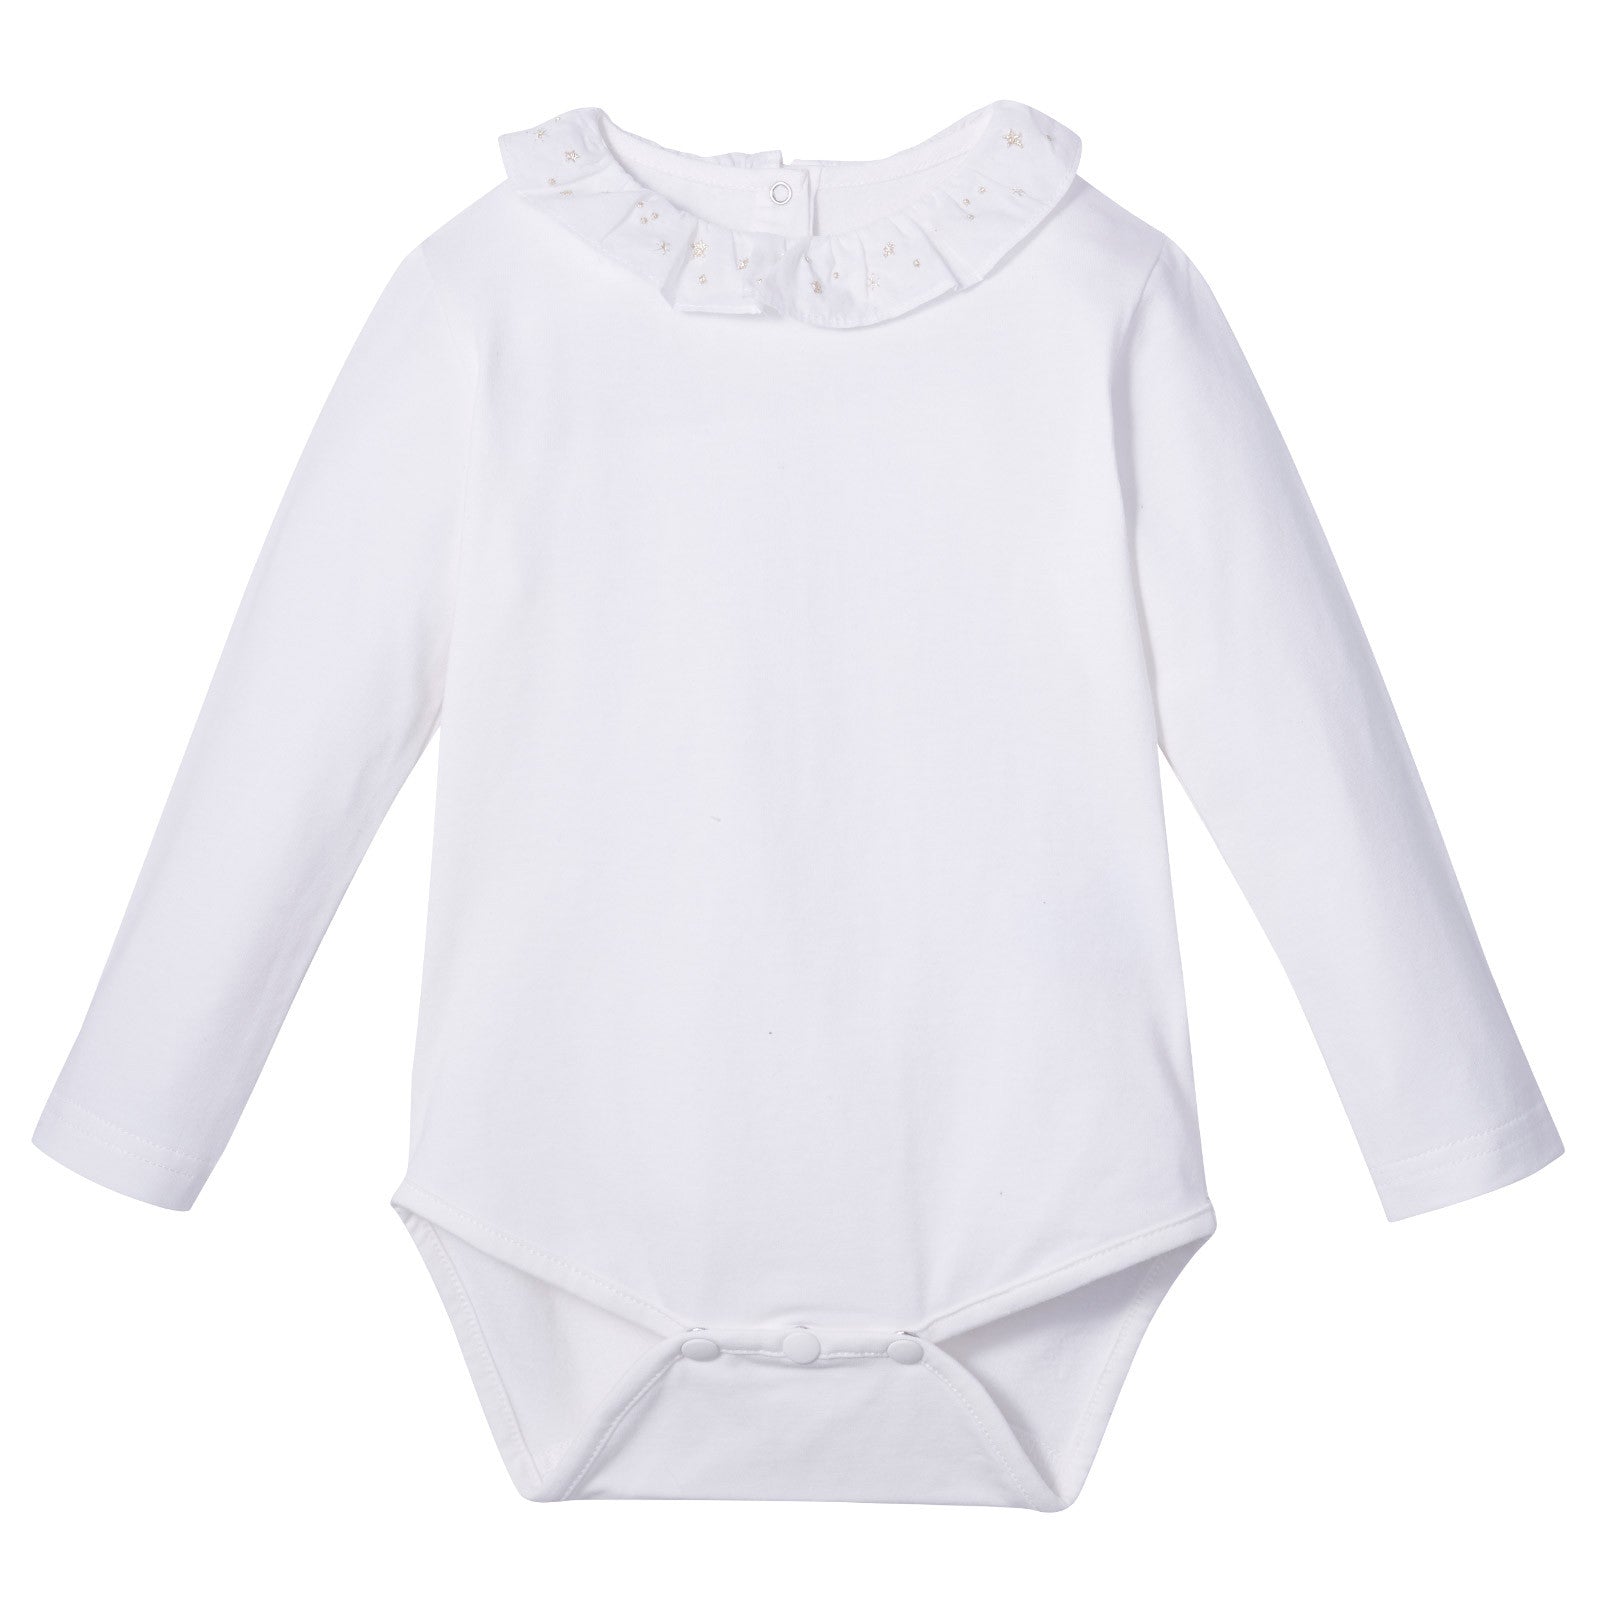 Baby Girls Ivory Cotton Jersey Bodyvest est With Embroidery Lace Collar - CÉMAROSE | Children's Fashion Store - 1